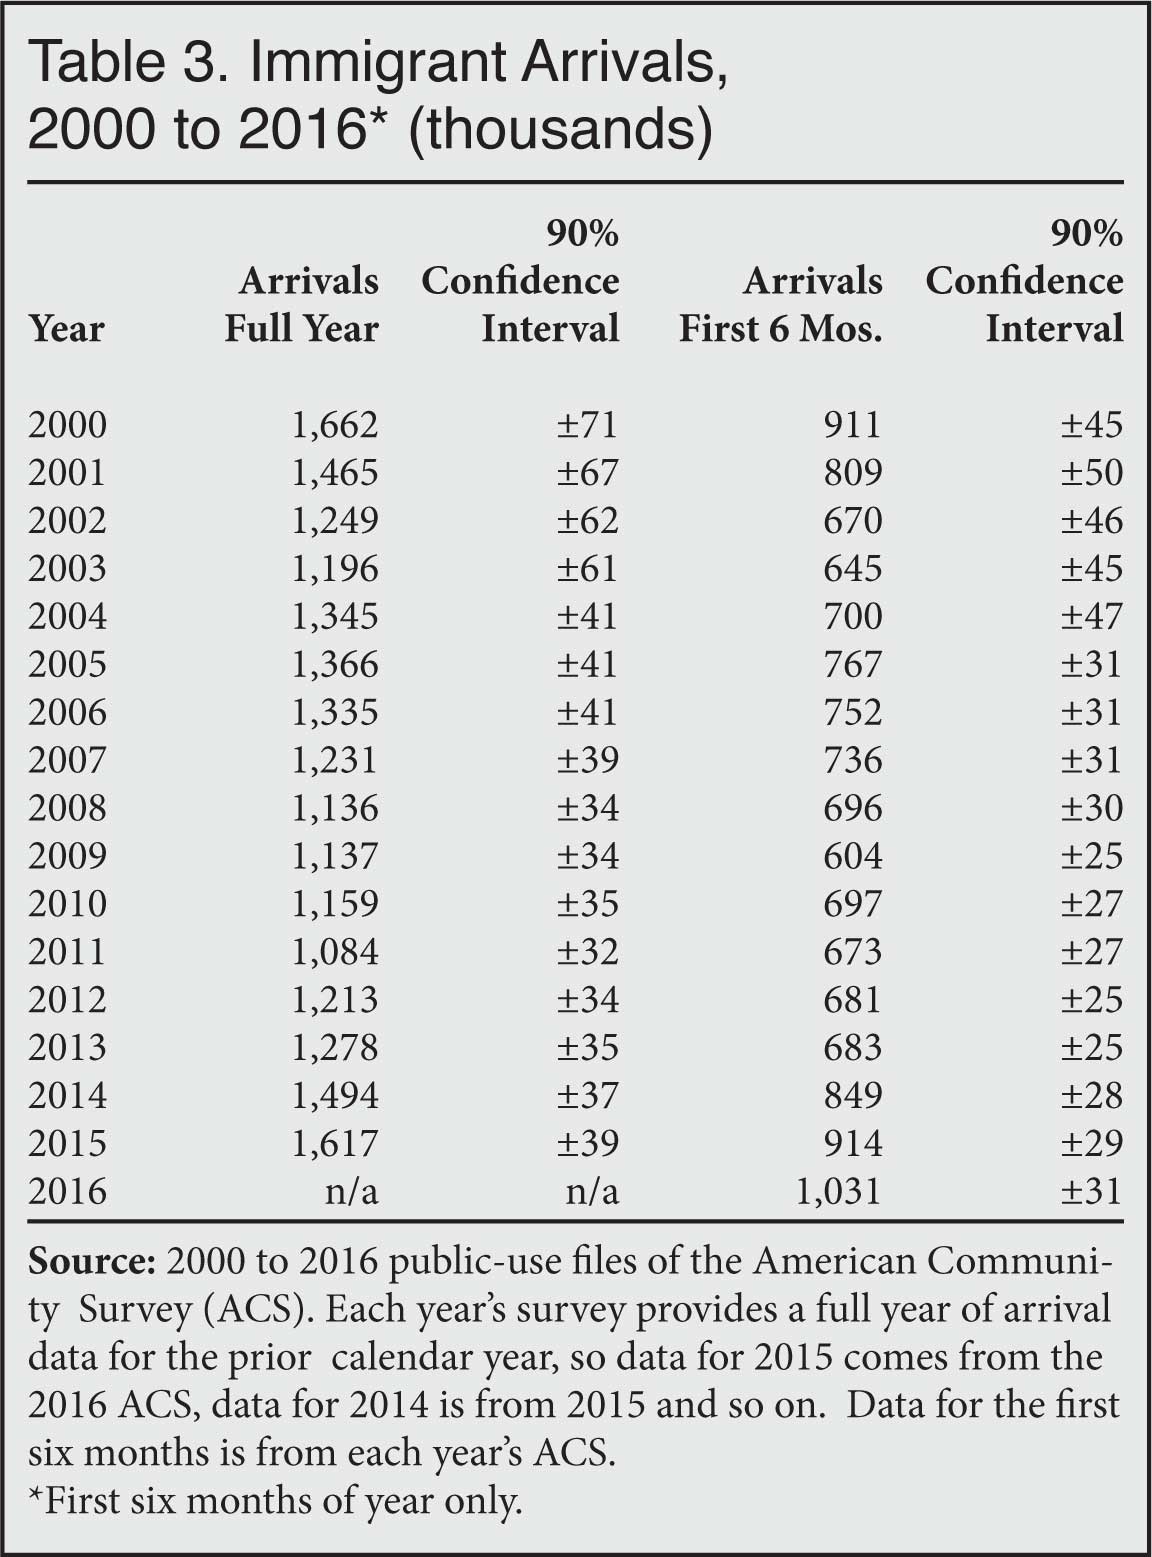 Table: immigrant arrivals, 2000-2016